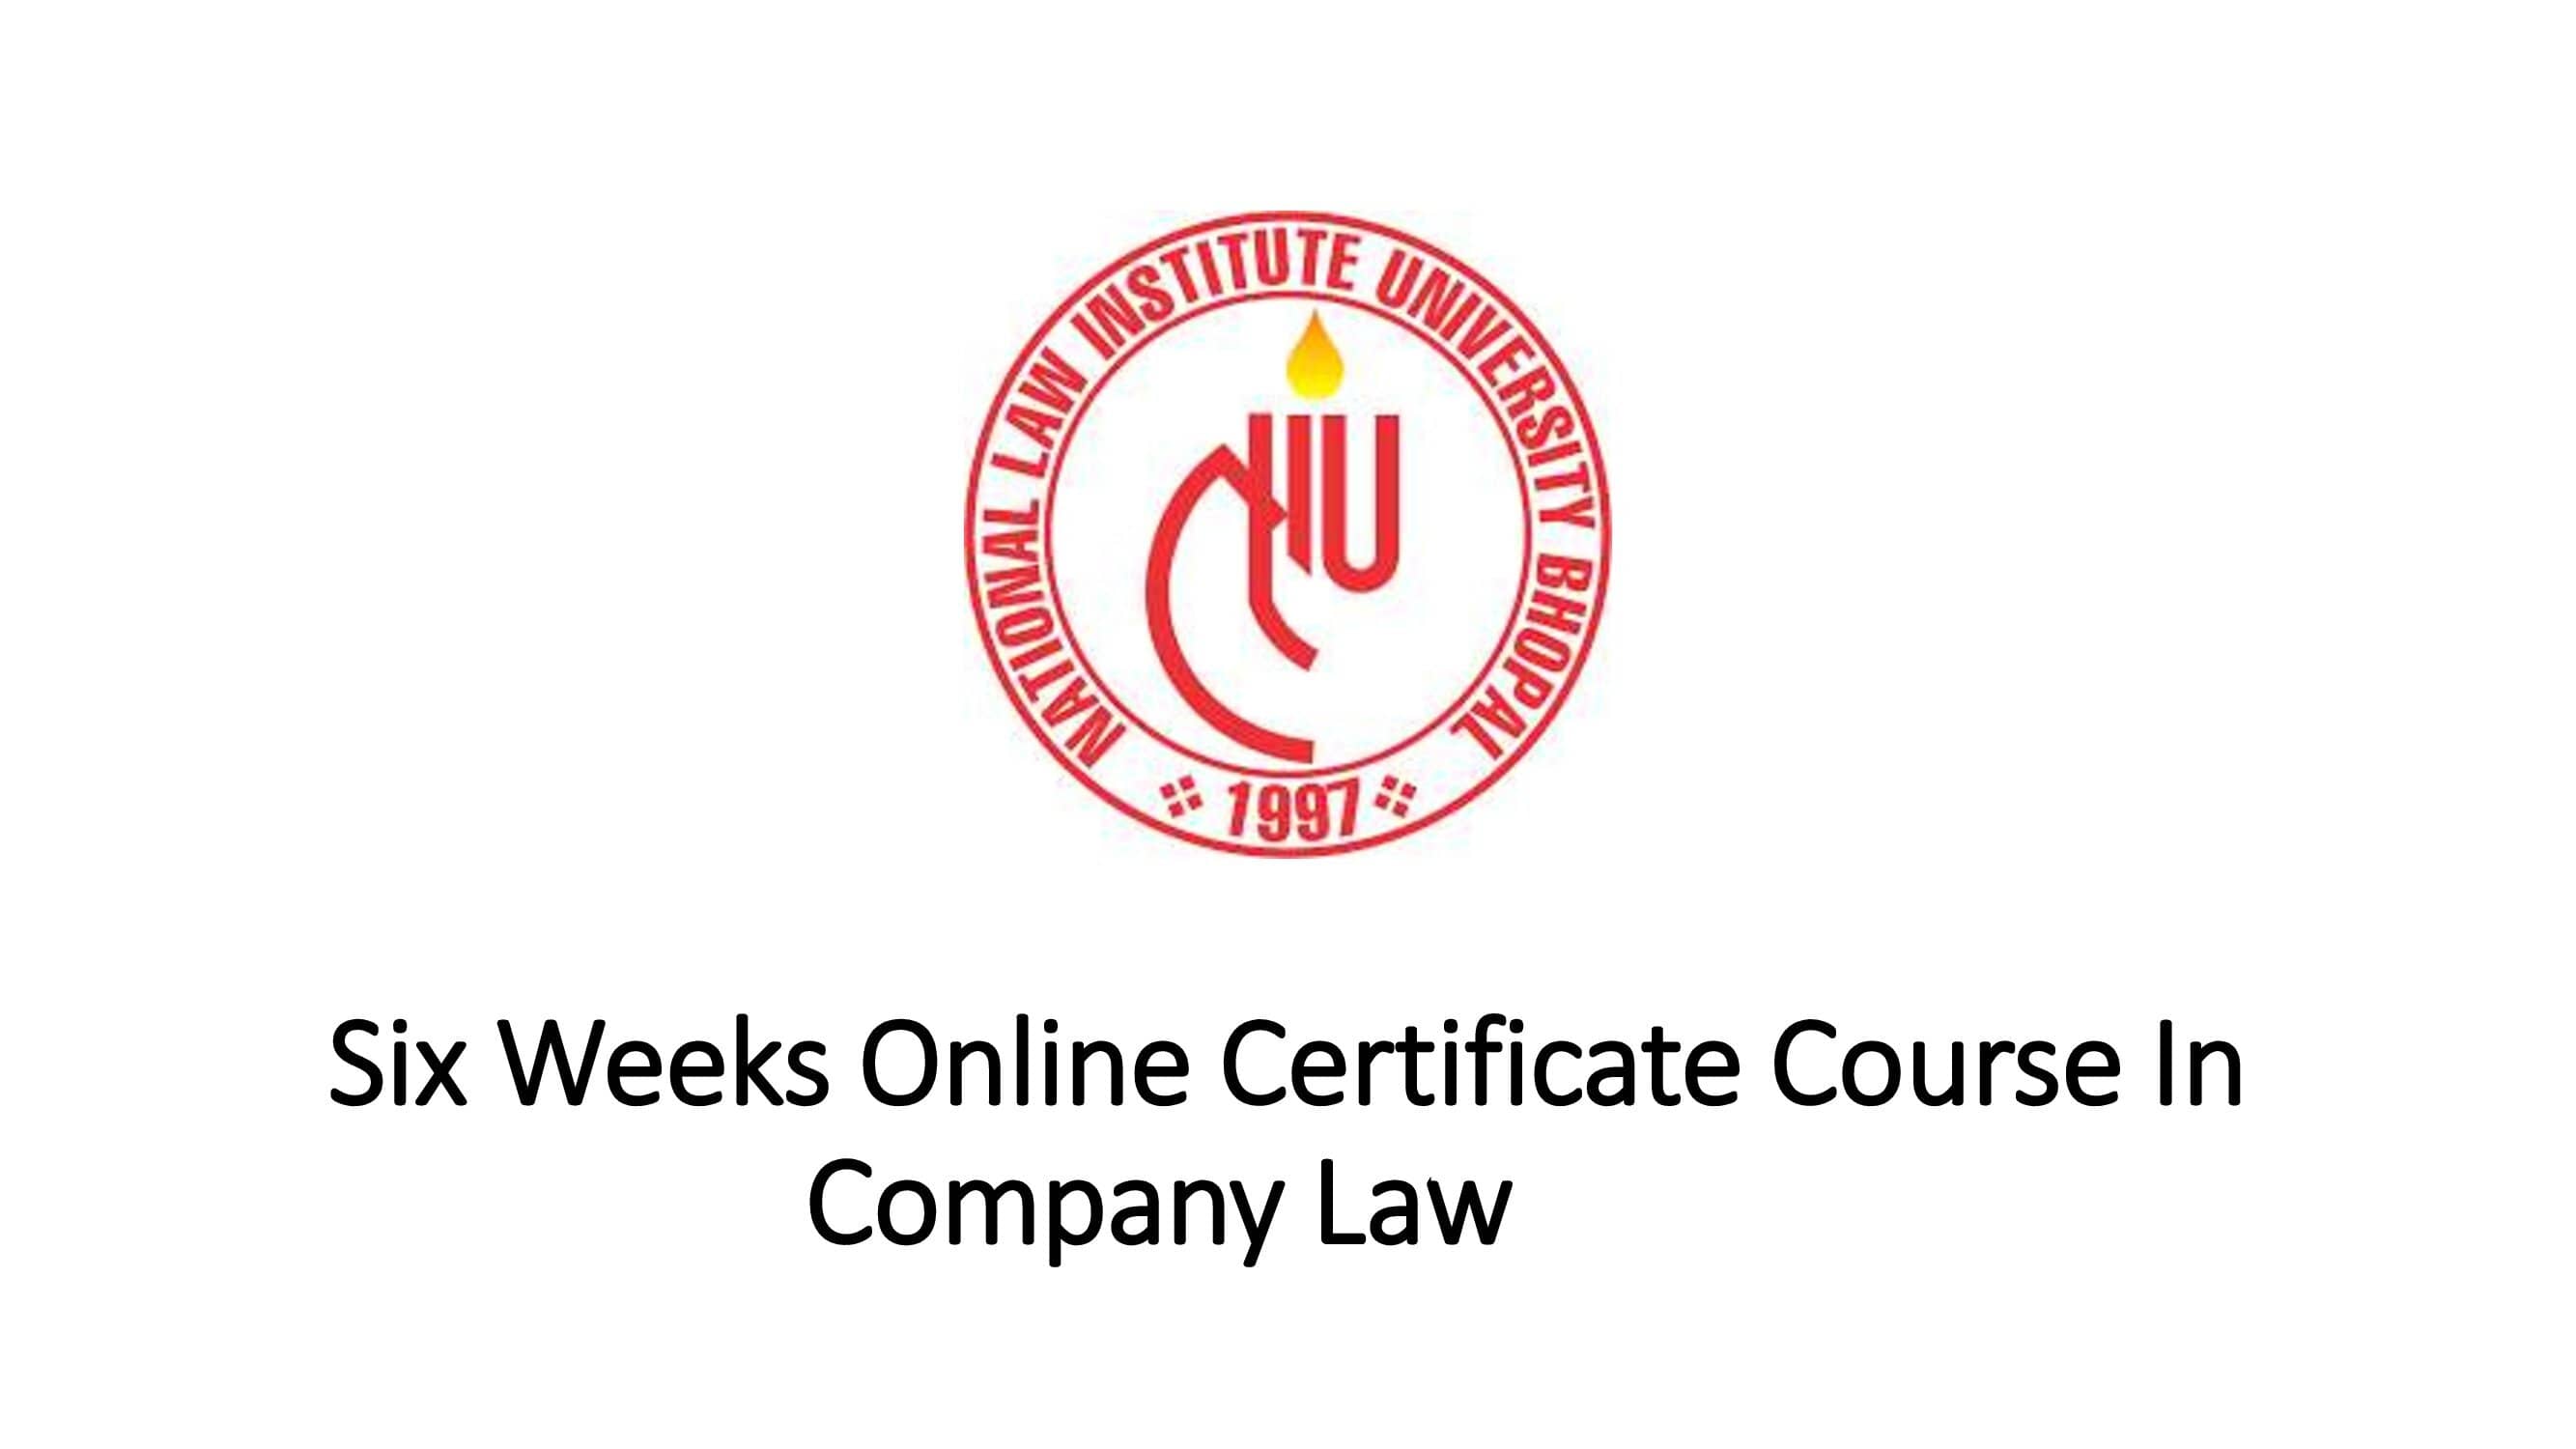 Six Weeks Online Certificate Course In Company Law (16th May - 24th June, 2022)